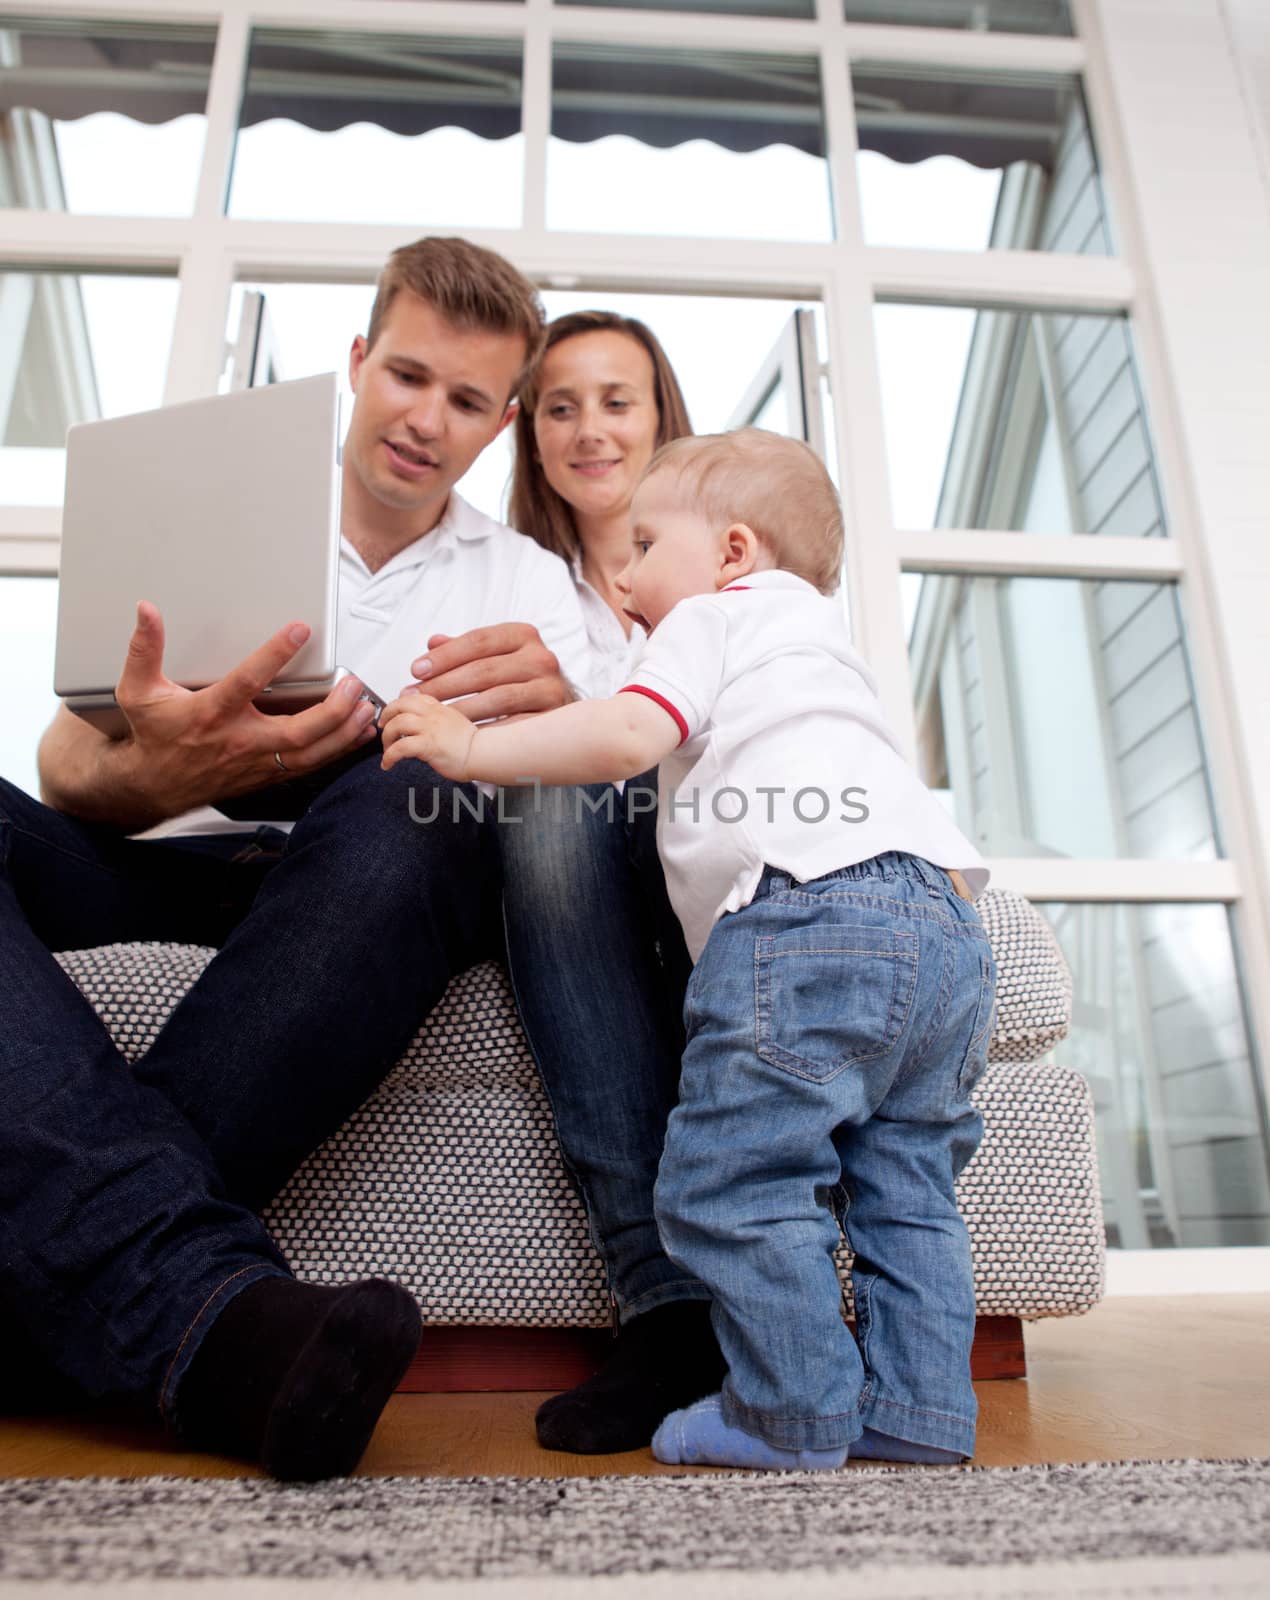 Young toddler son trying to view laptop coputer with parents